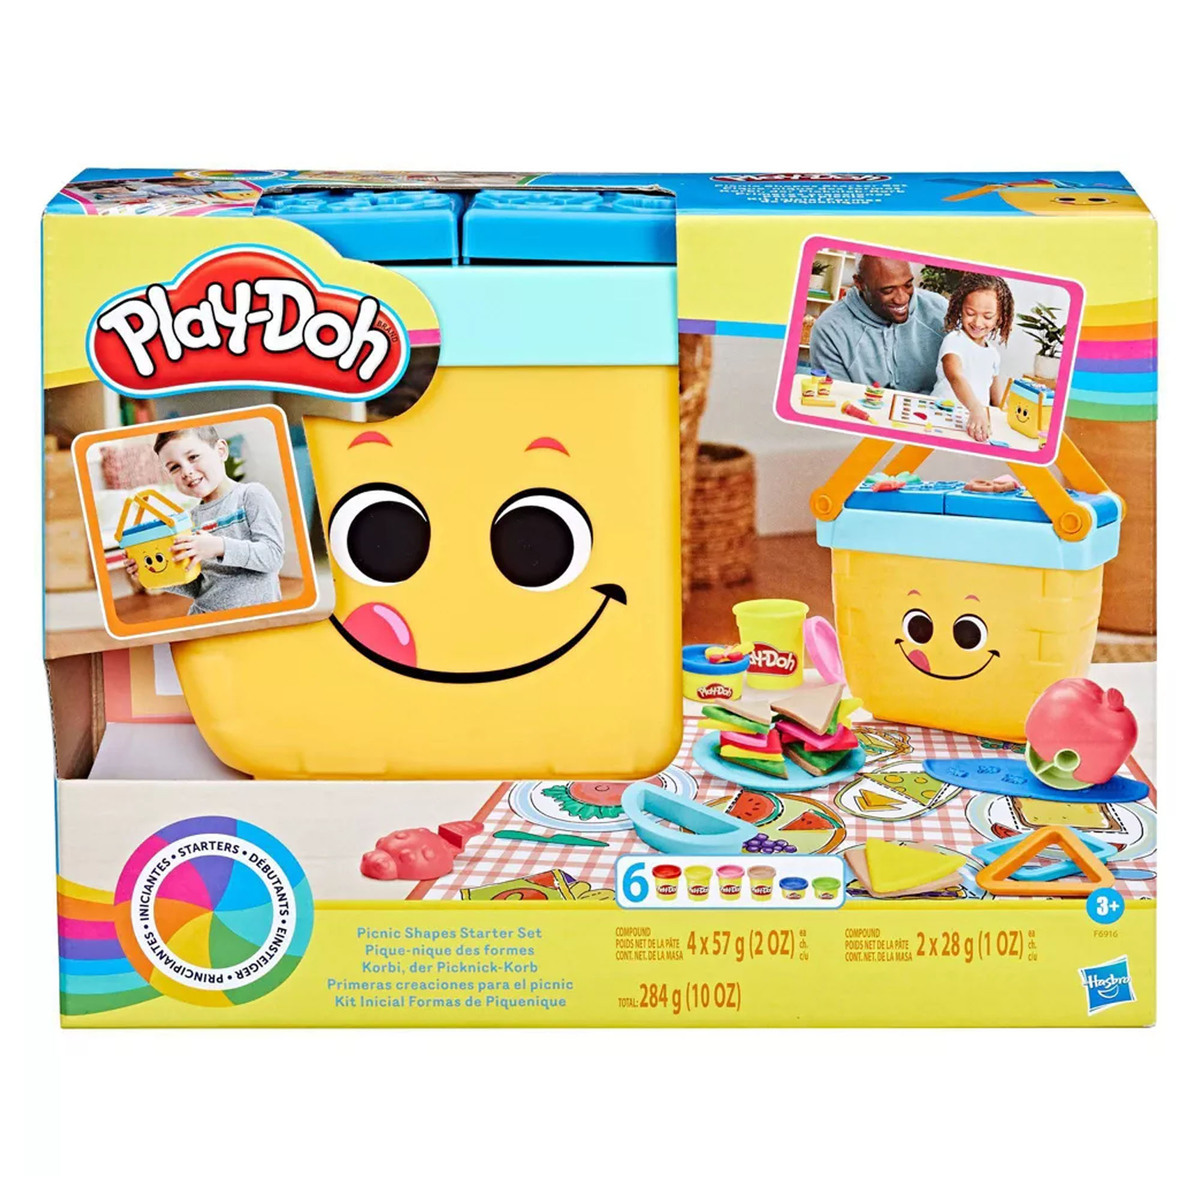 Playdoh Picnic Shapes Starter Set Art And Crafts Activity Toy for Kids, F6916